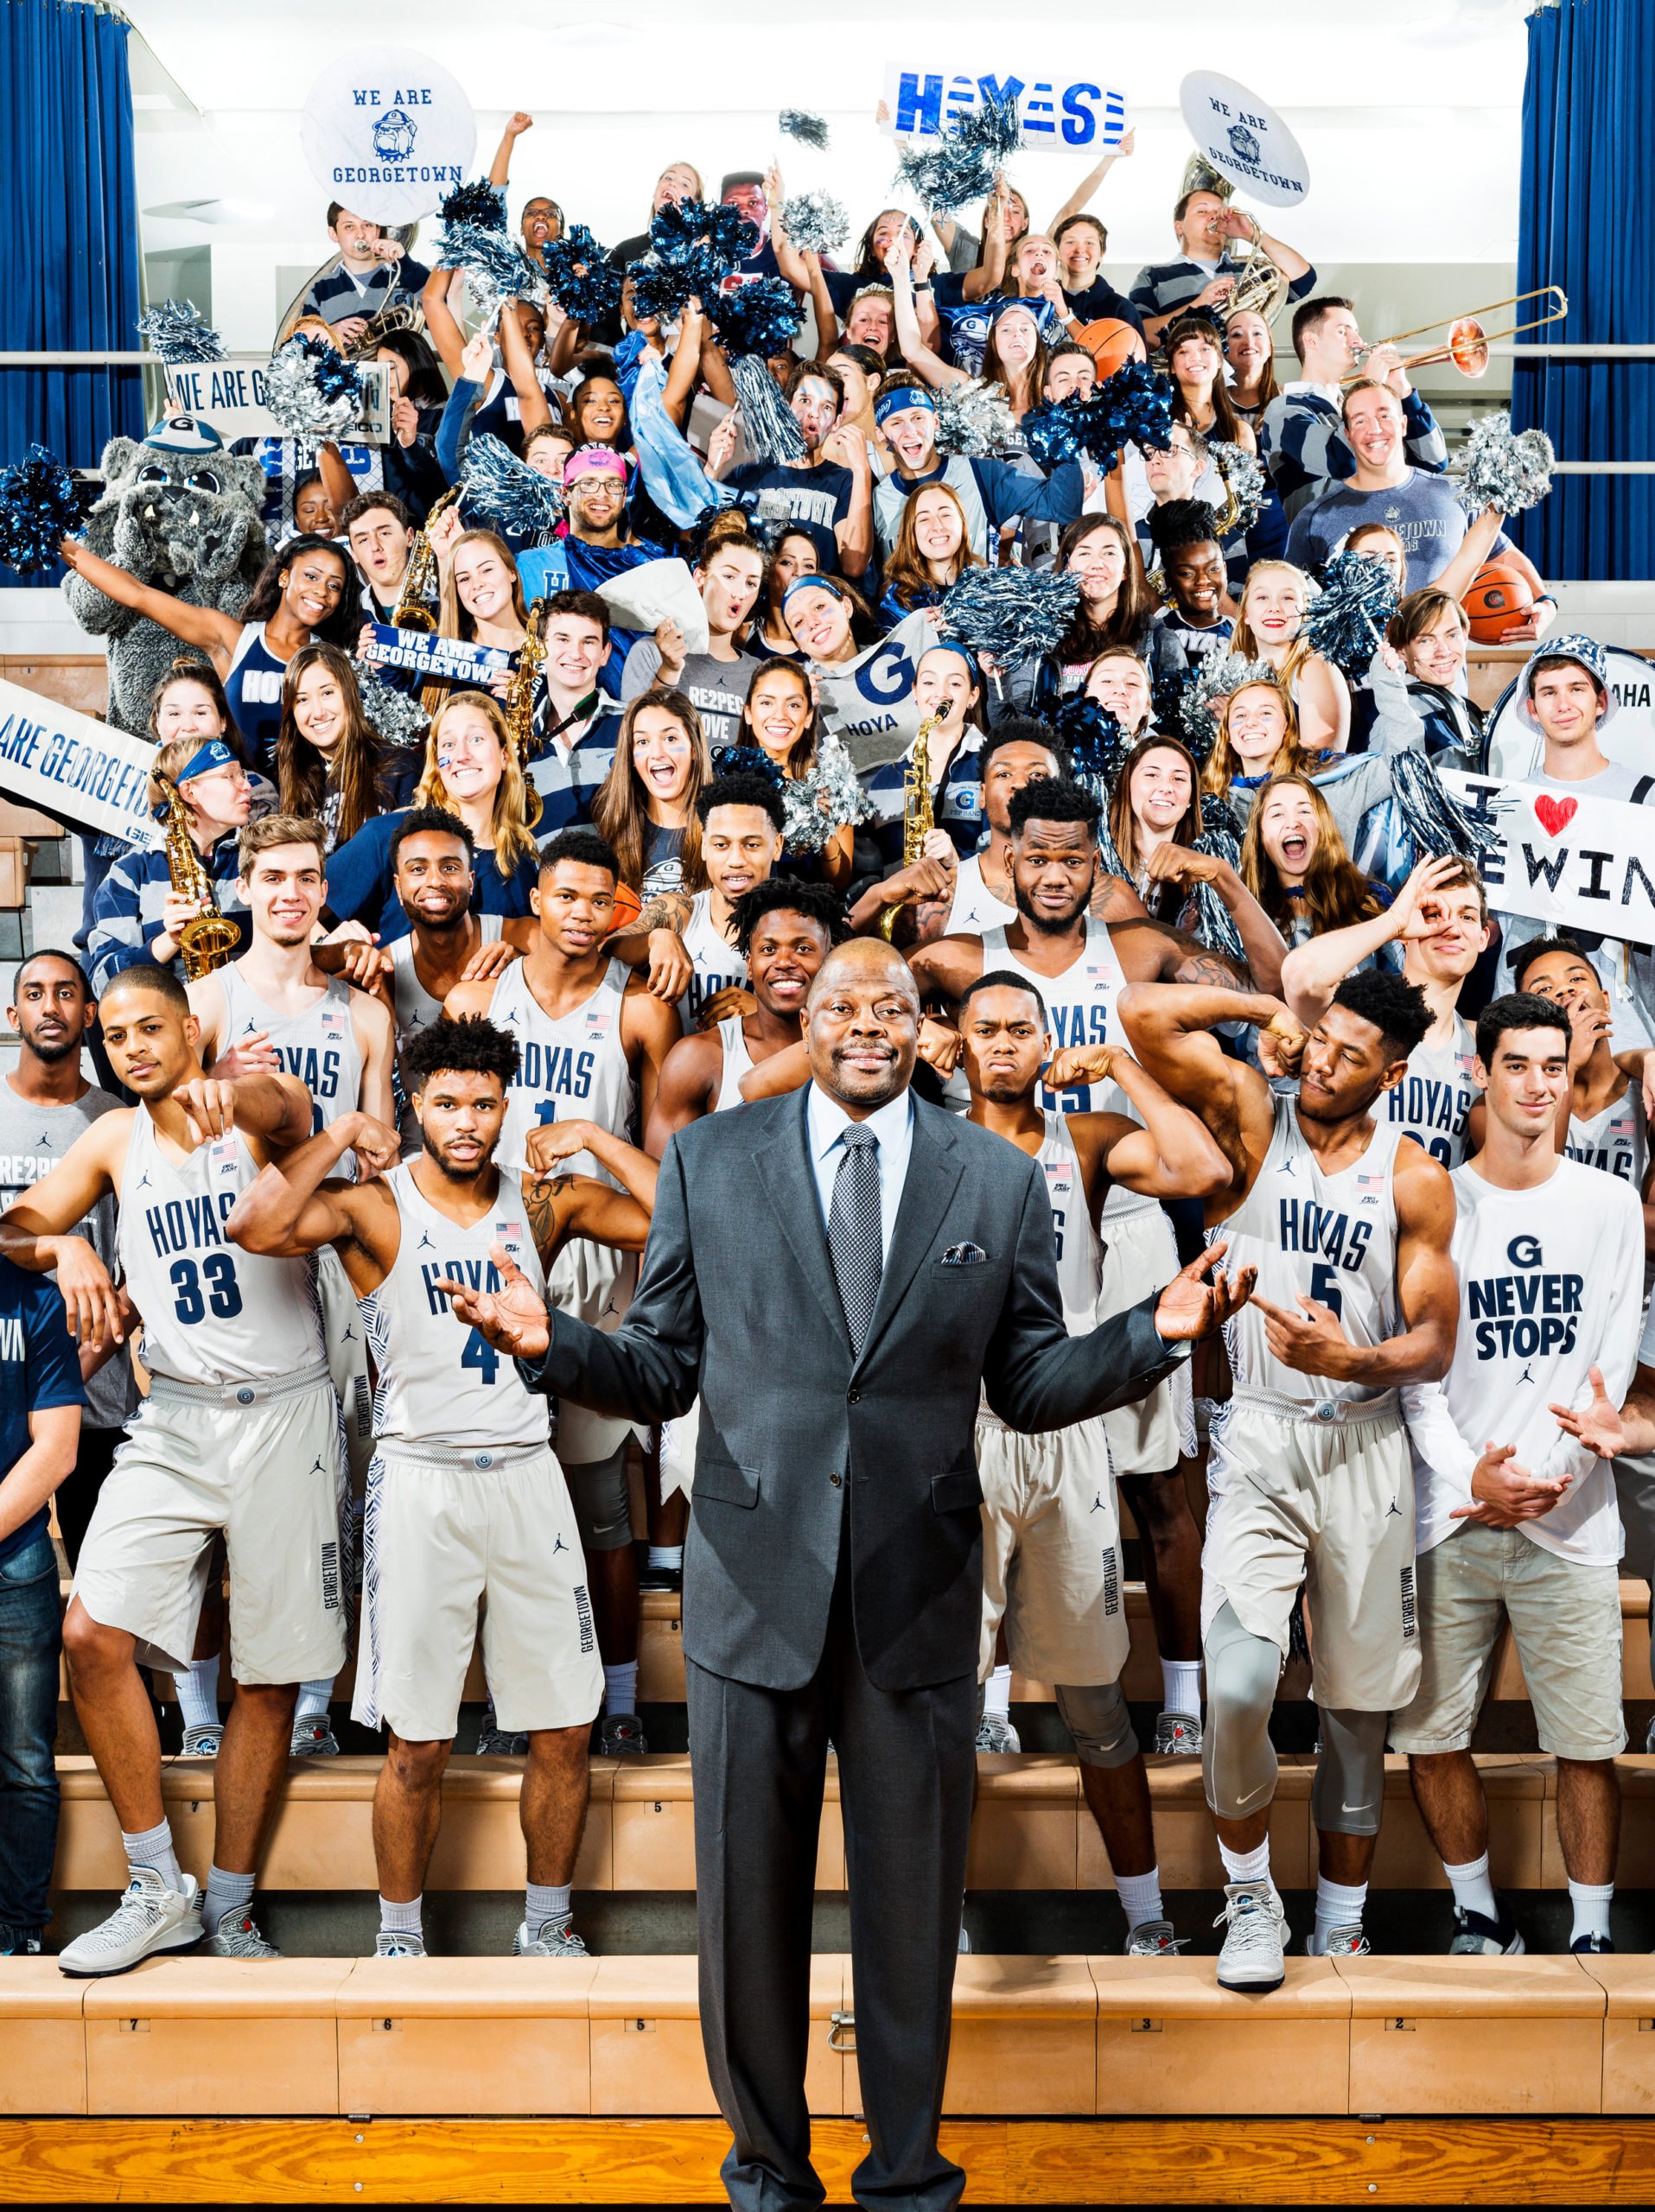 Patrick Ewing plans to bring Georgetown Hoya back to prominence as new head  coach